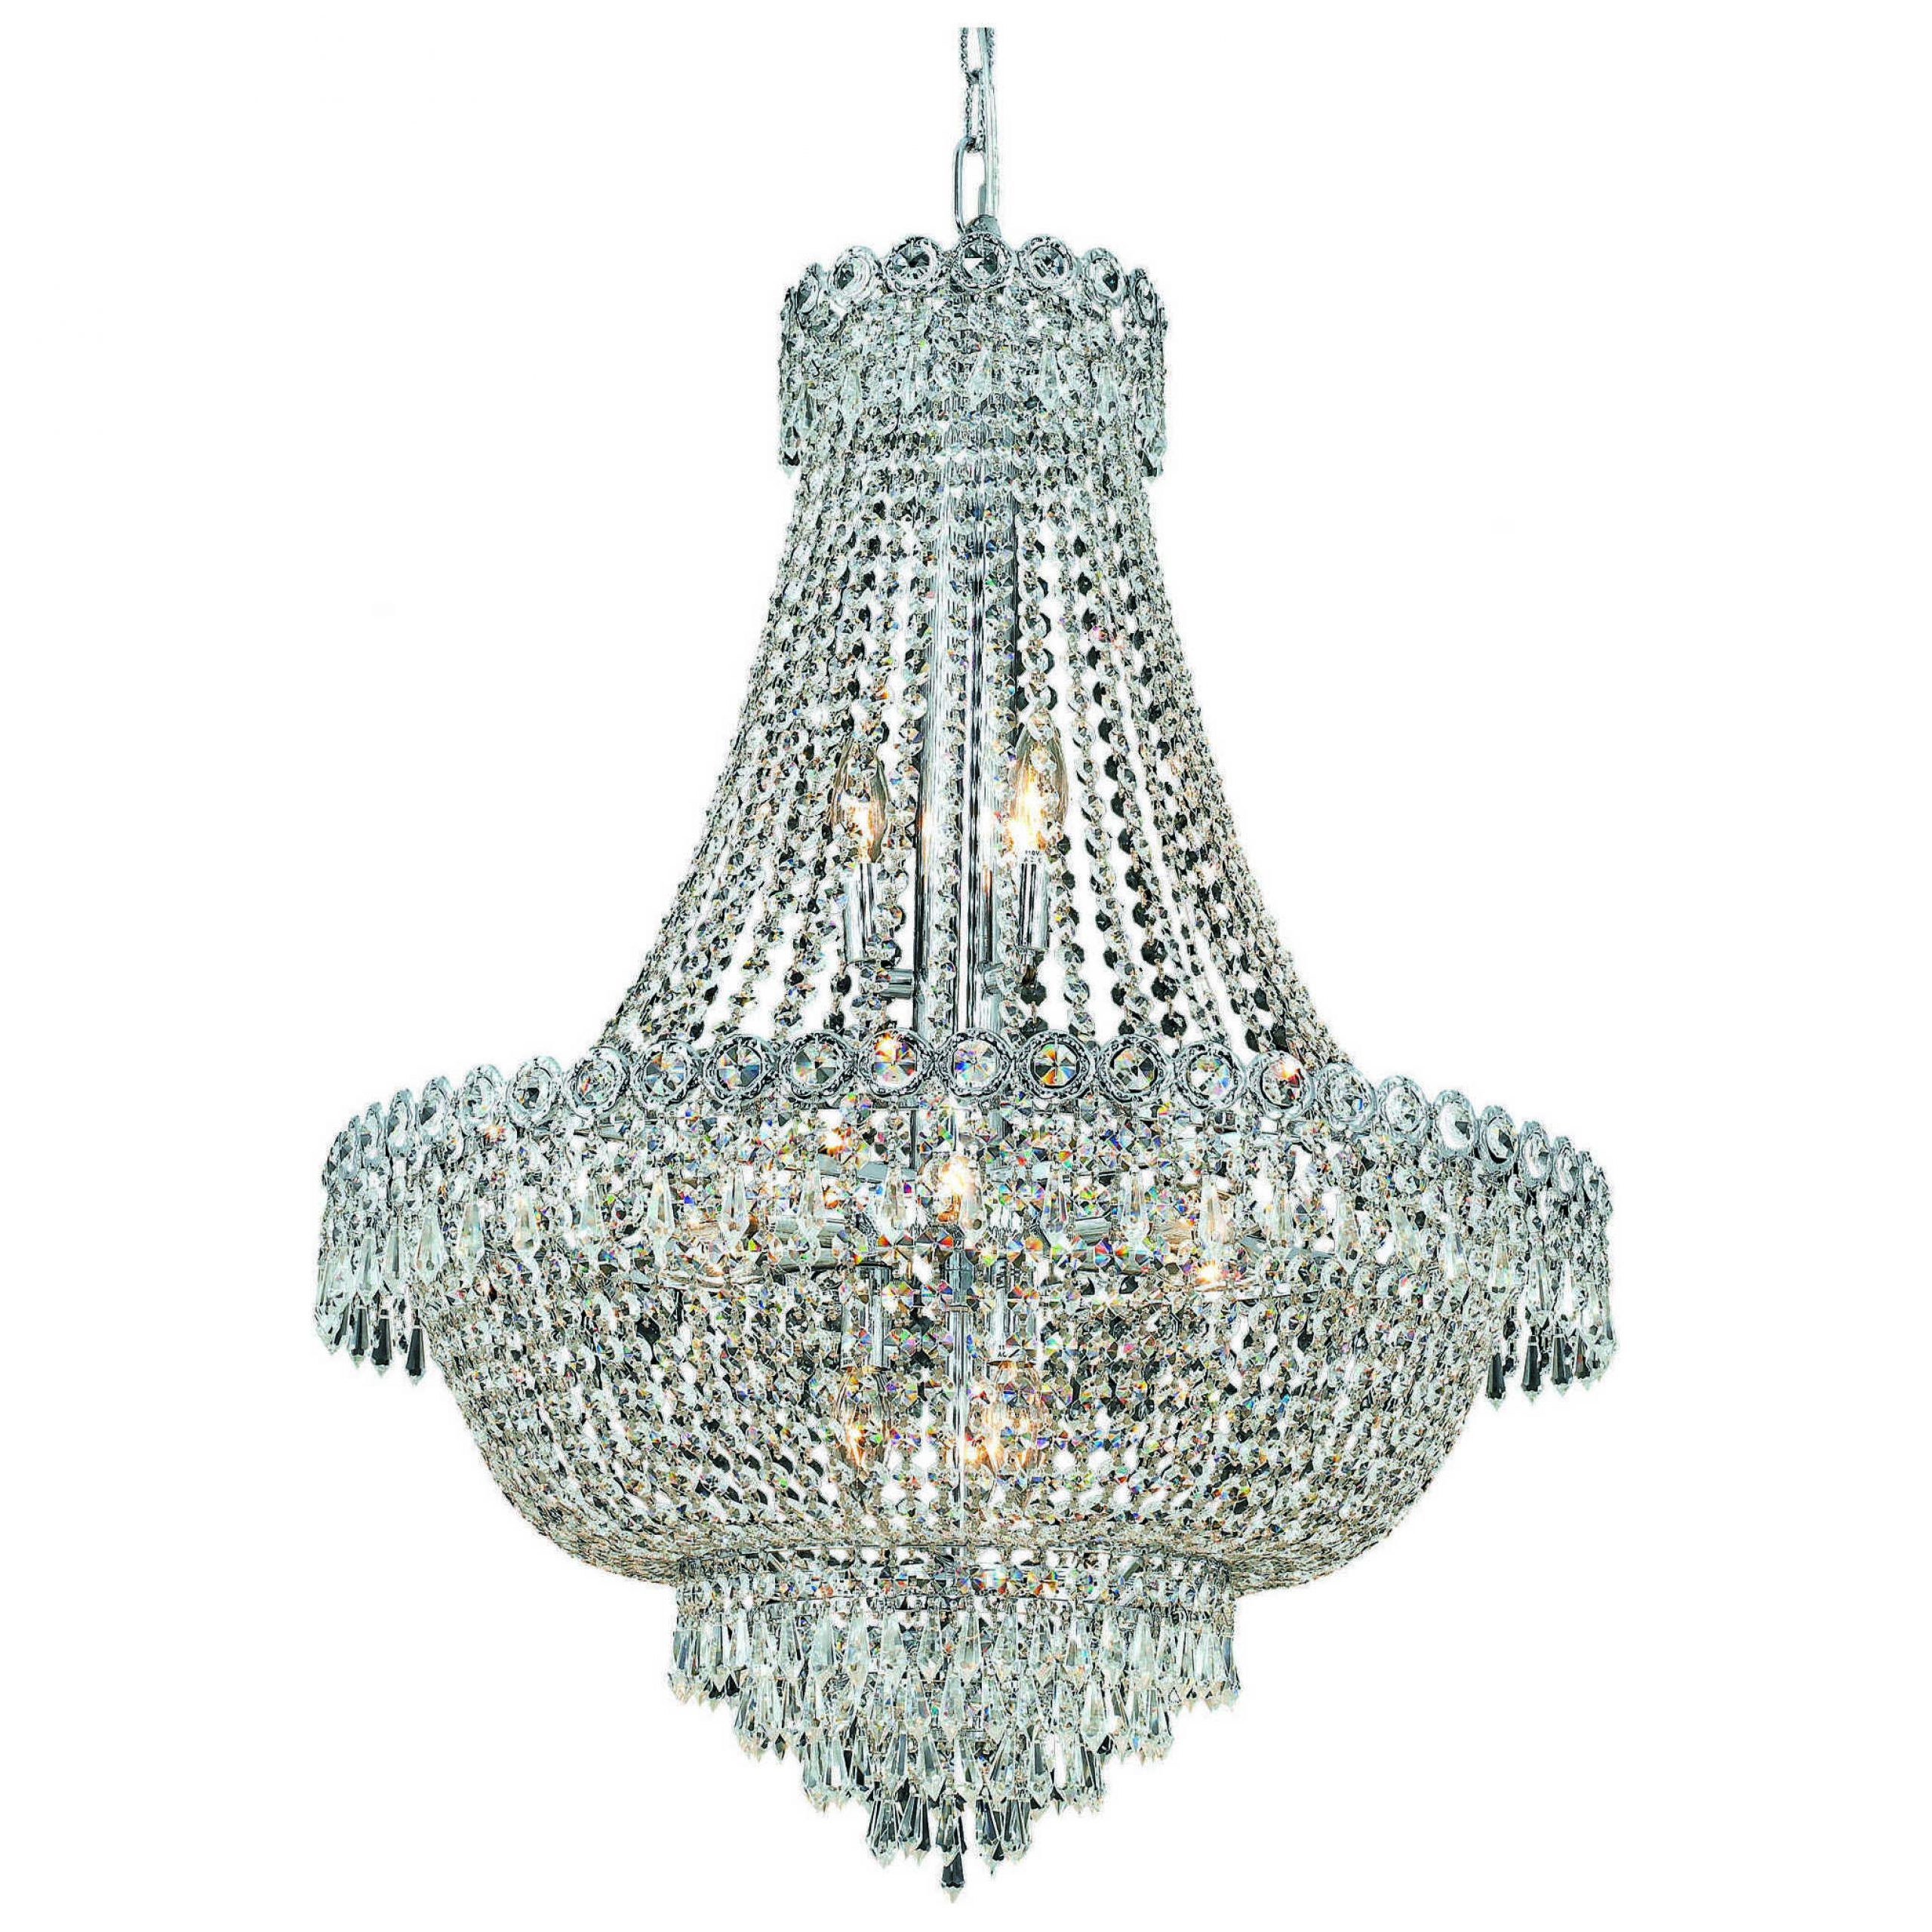 Elegant Lighting Century Royal Cut Chrome & Crystal 12 With Regard To Royal Cut Crystal Chandeliers (View 9 of 15)